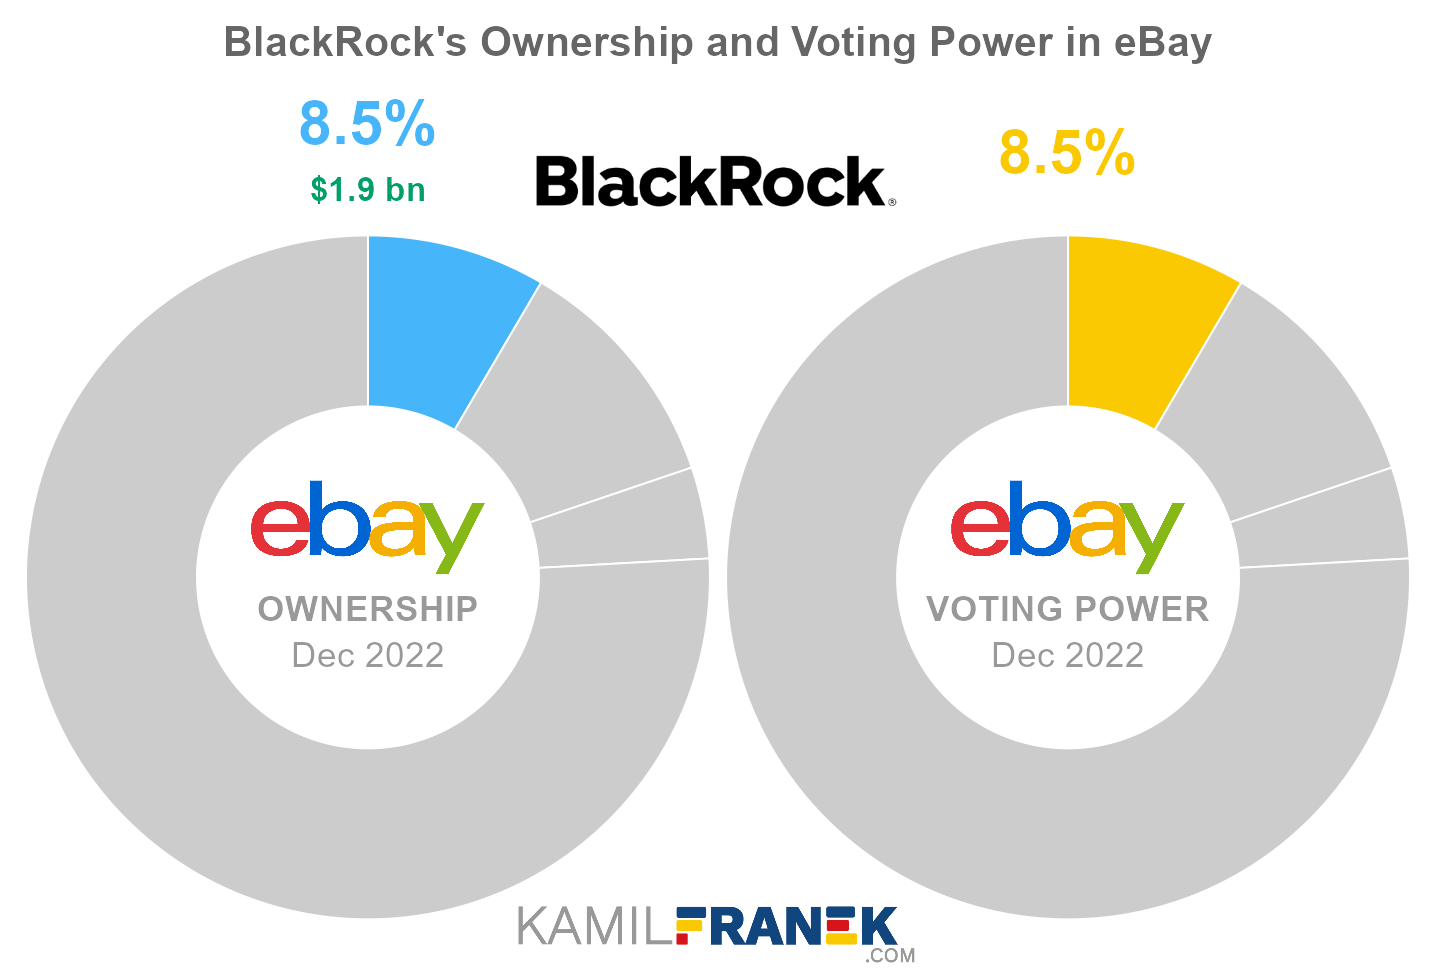 BlackRock's share ownership and voting power in eBay (chart)